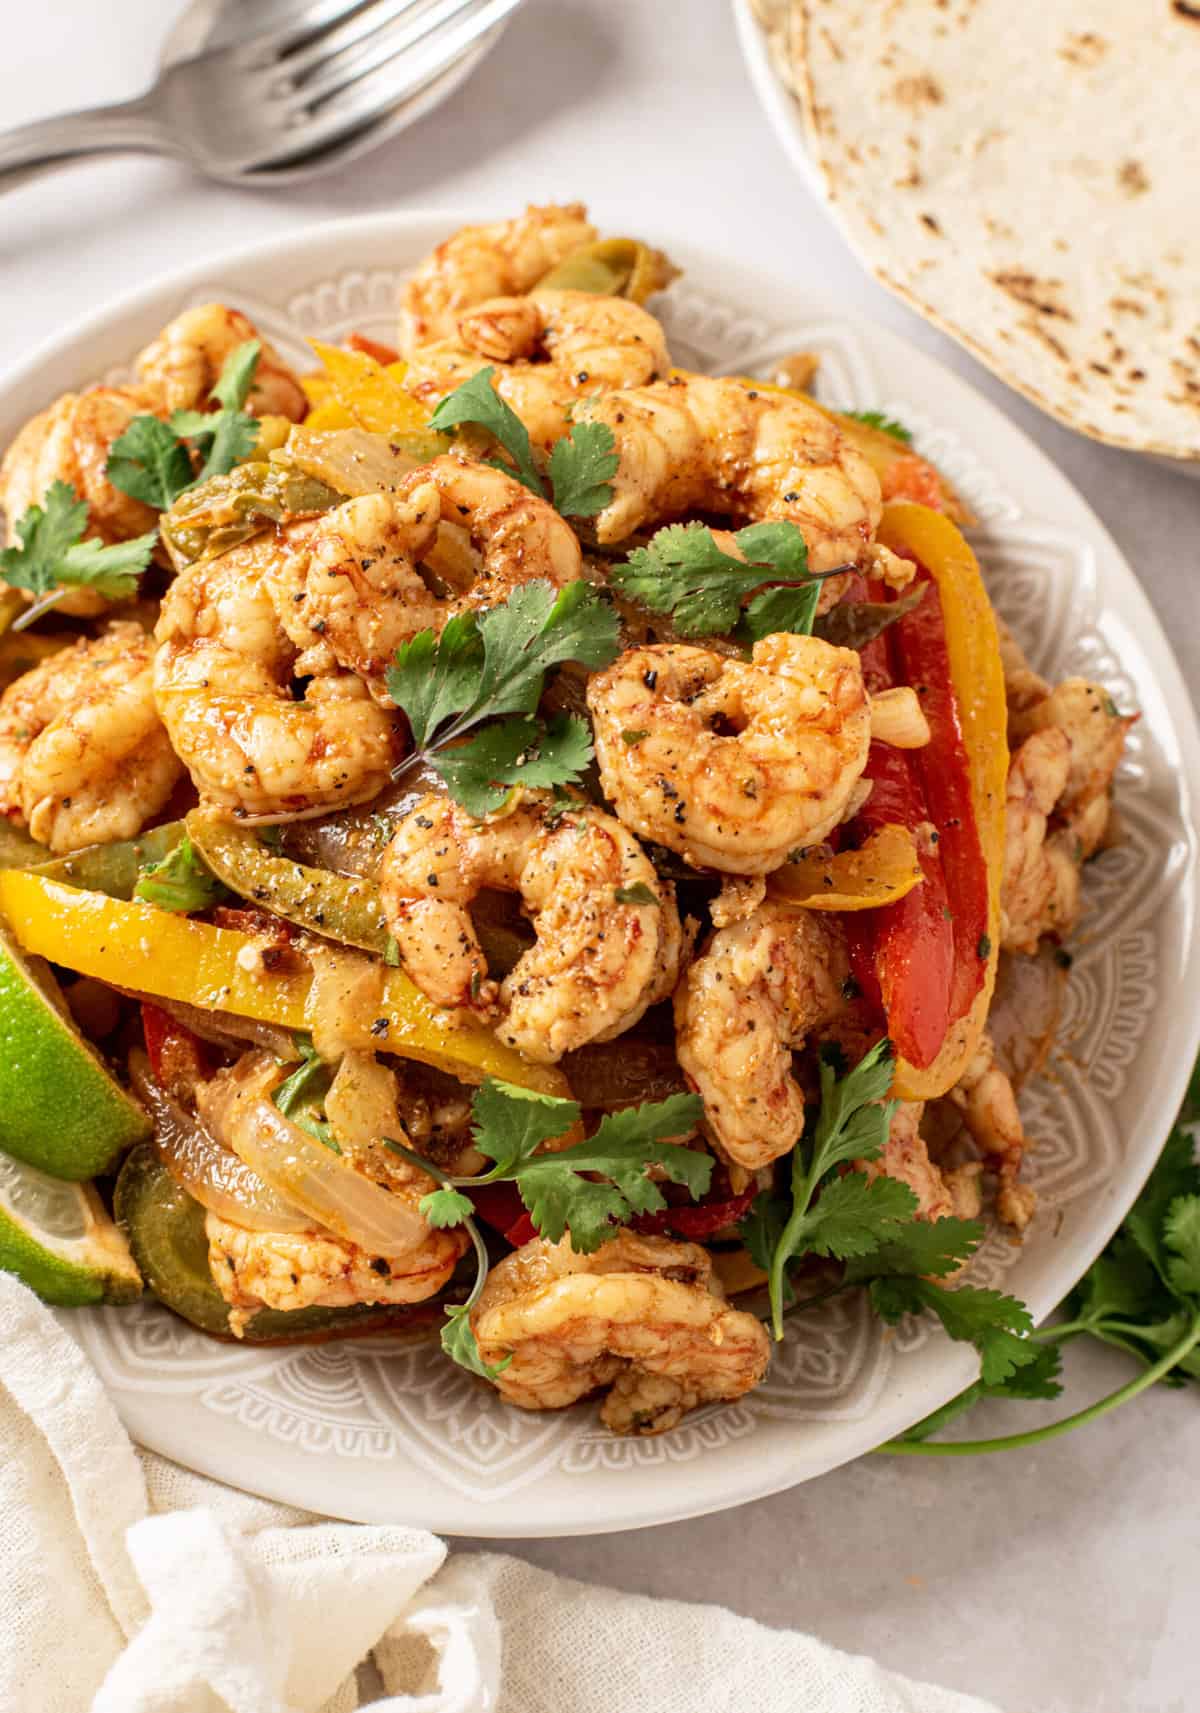 A serving of shrimp fajitas is presented on a round white plate.